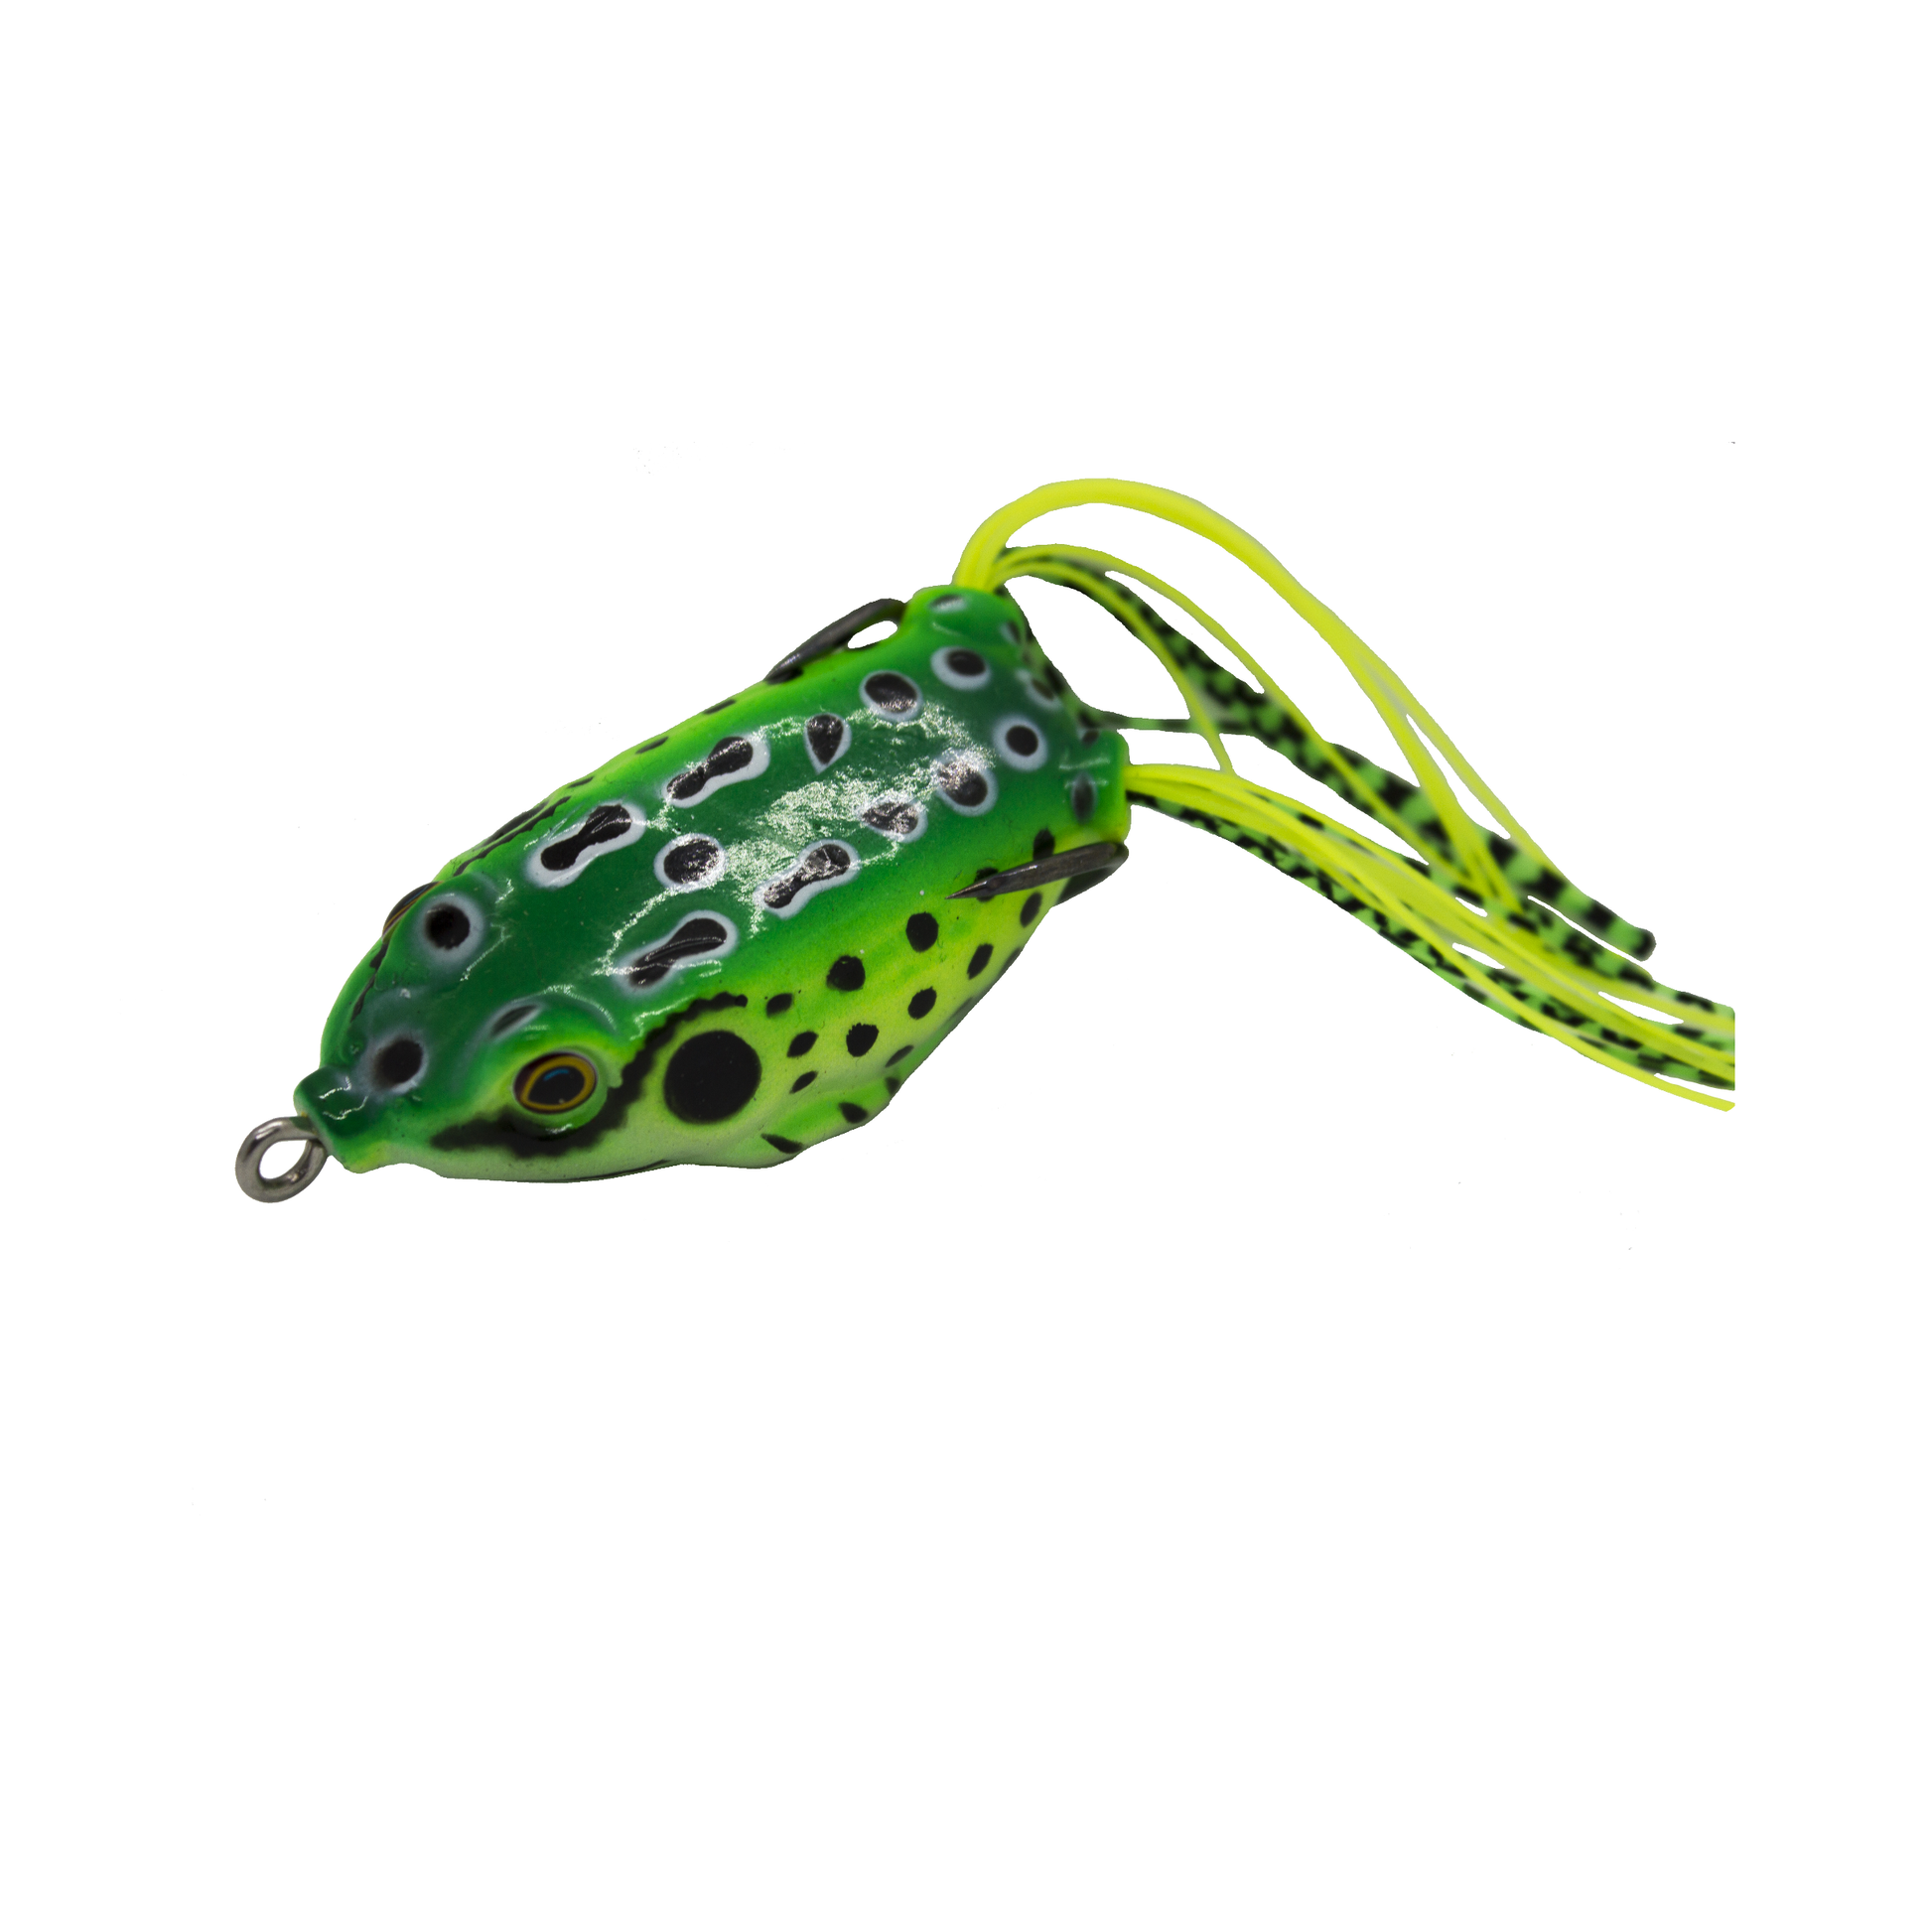 What is Ecooda Hornet Popping Top Water Pencil Fishing Lure Bait